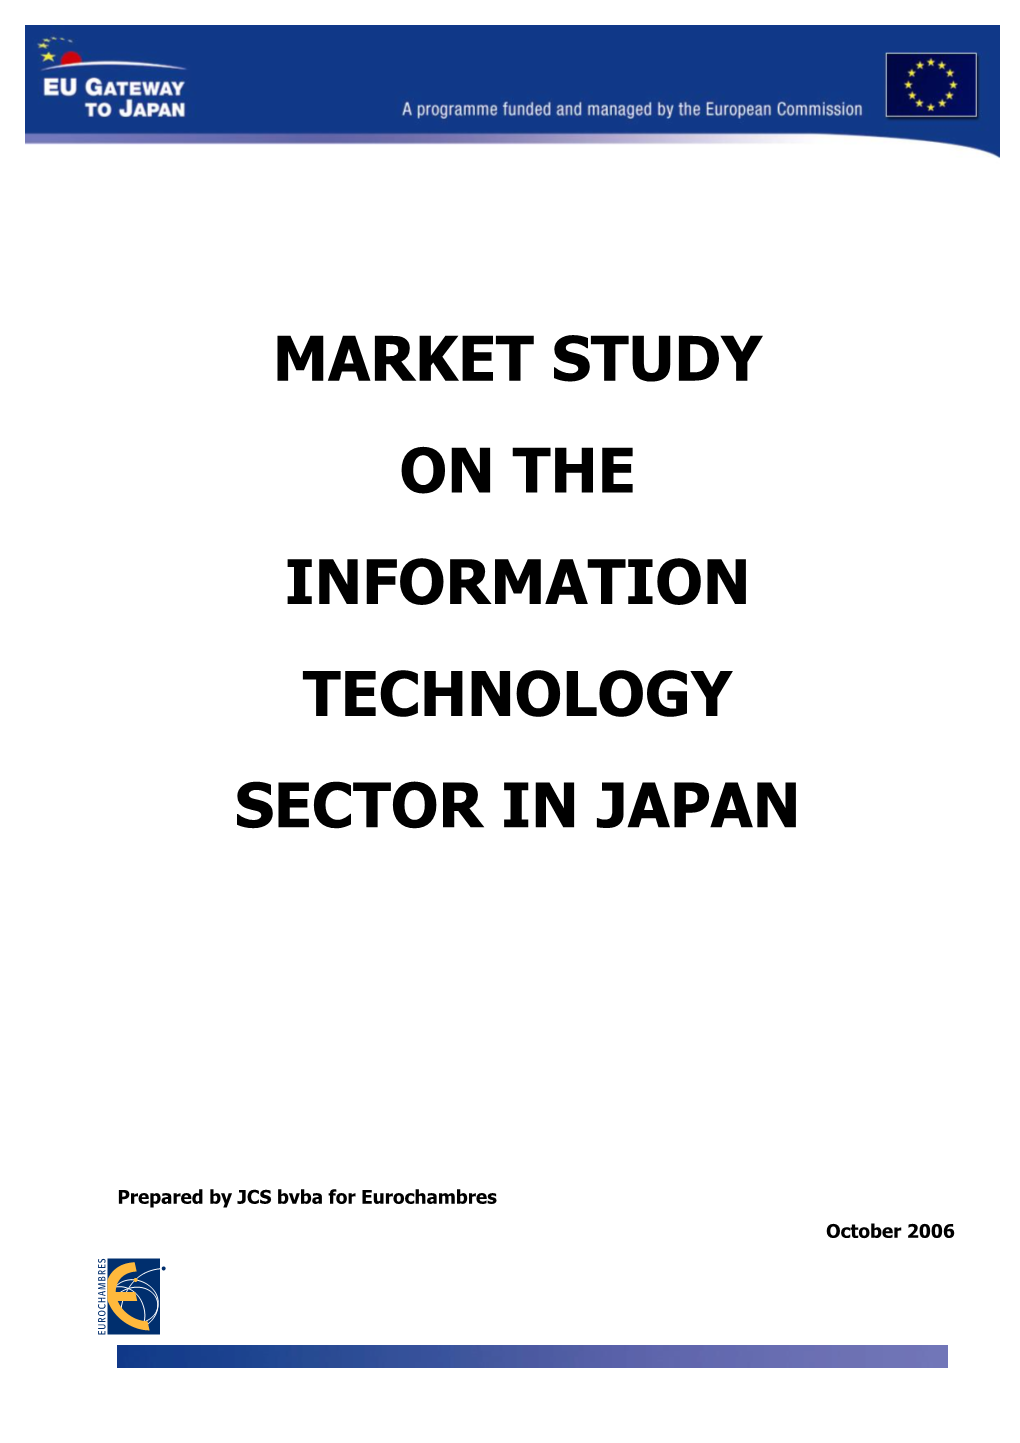 Market Study on the Information Technology Sector in Japan